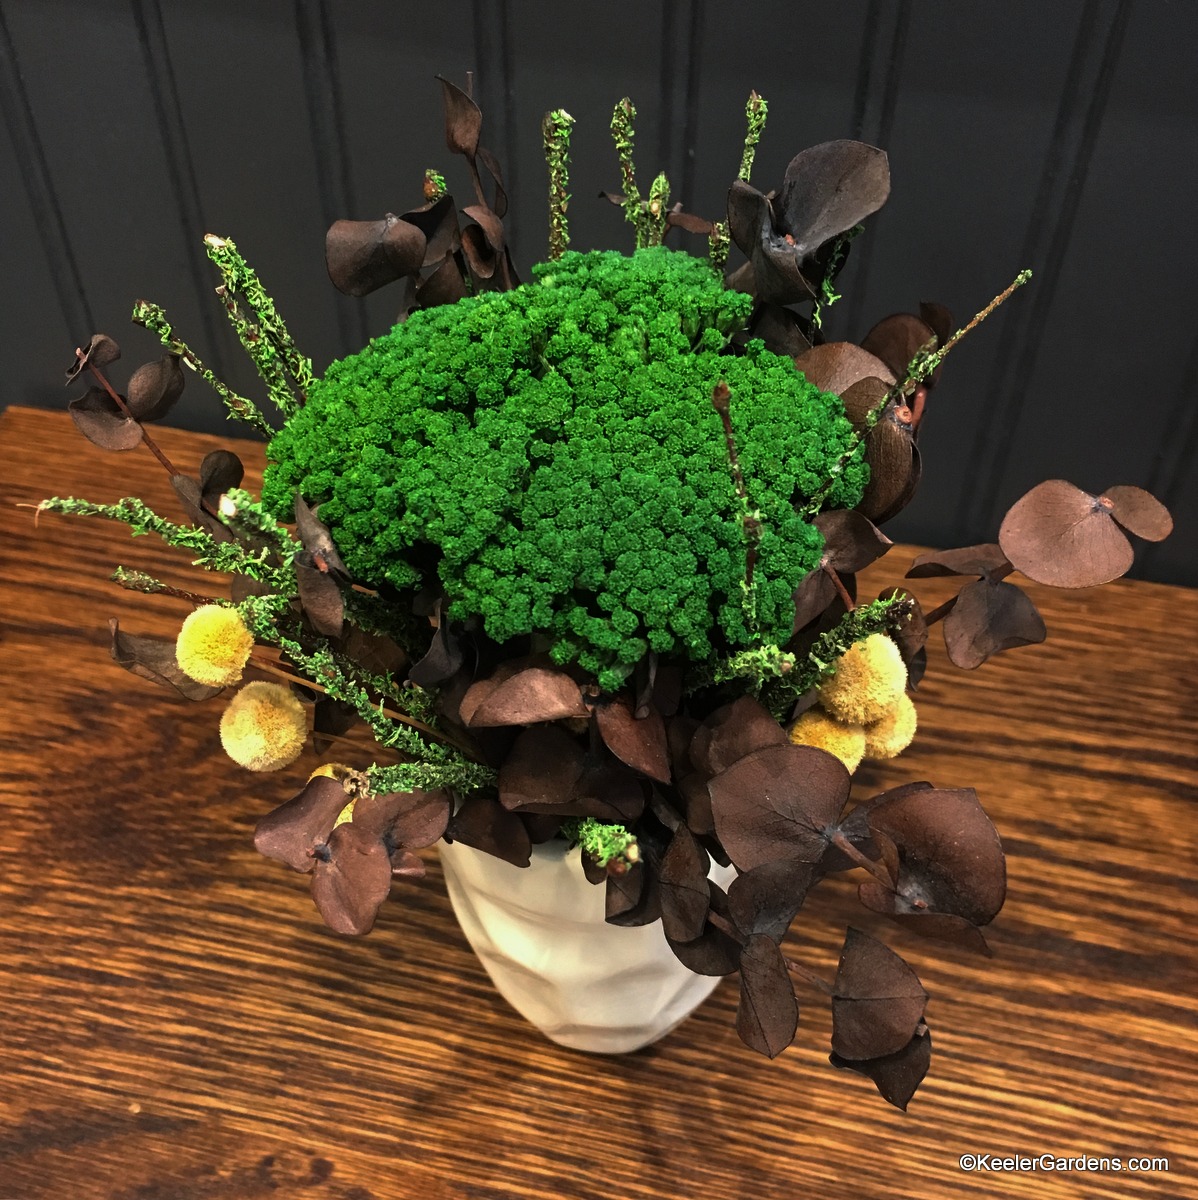 A sweet cluster of dried botanicals including green yarrow, chocolate-colored eucalyptus, yellow flower buttons, and green-flocked birch branches, all in a miniature off-white rippled vase.